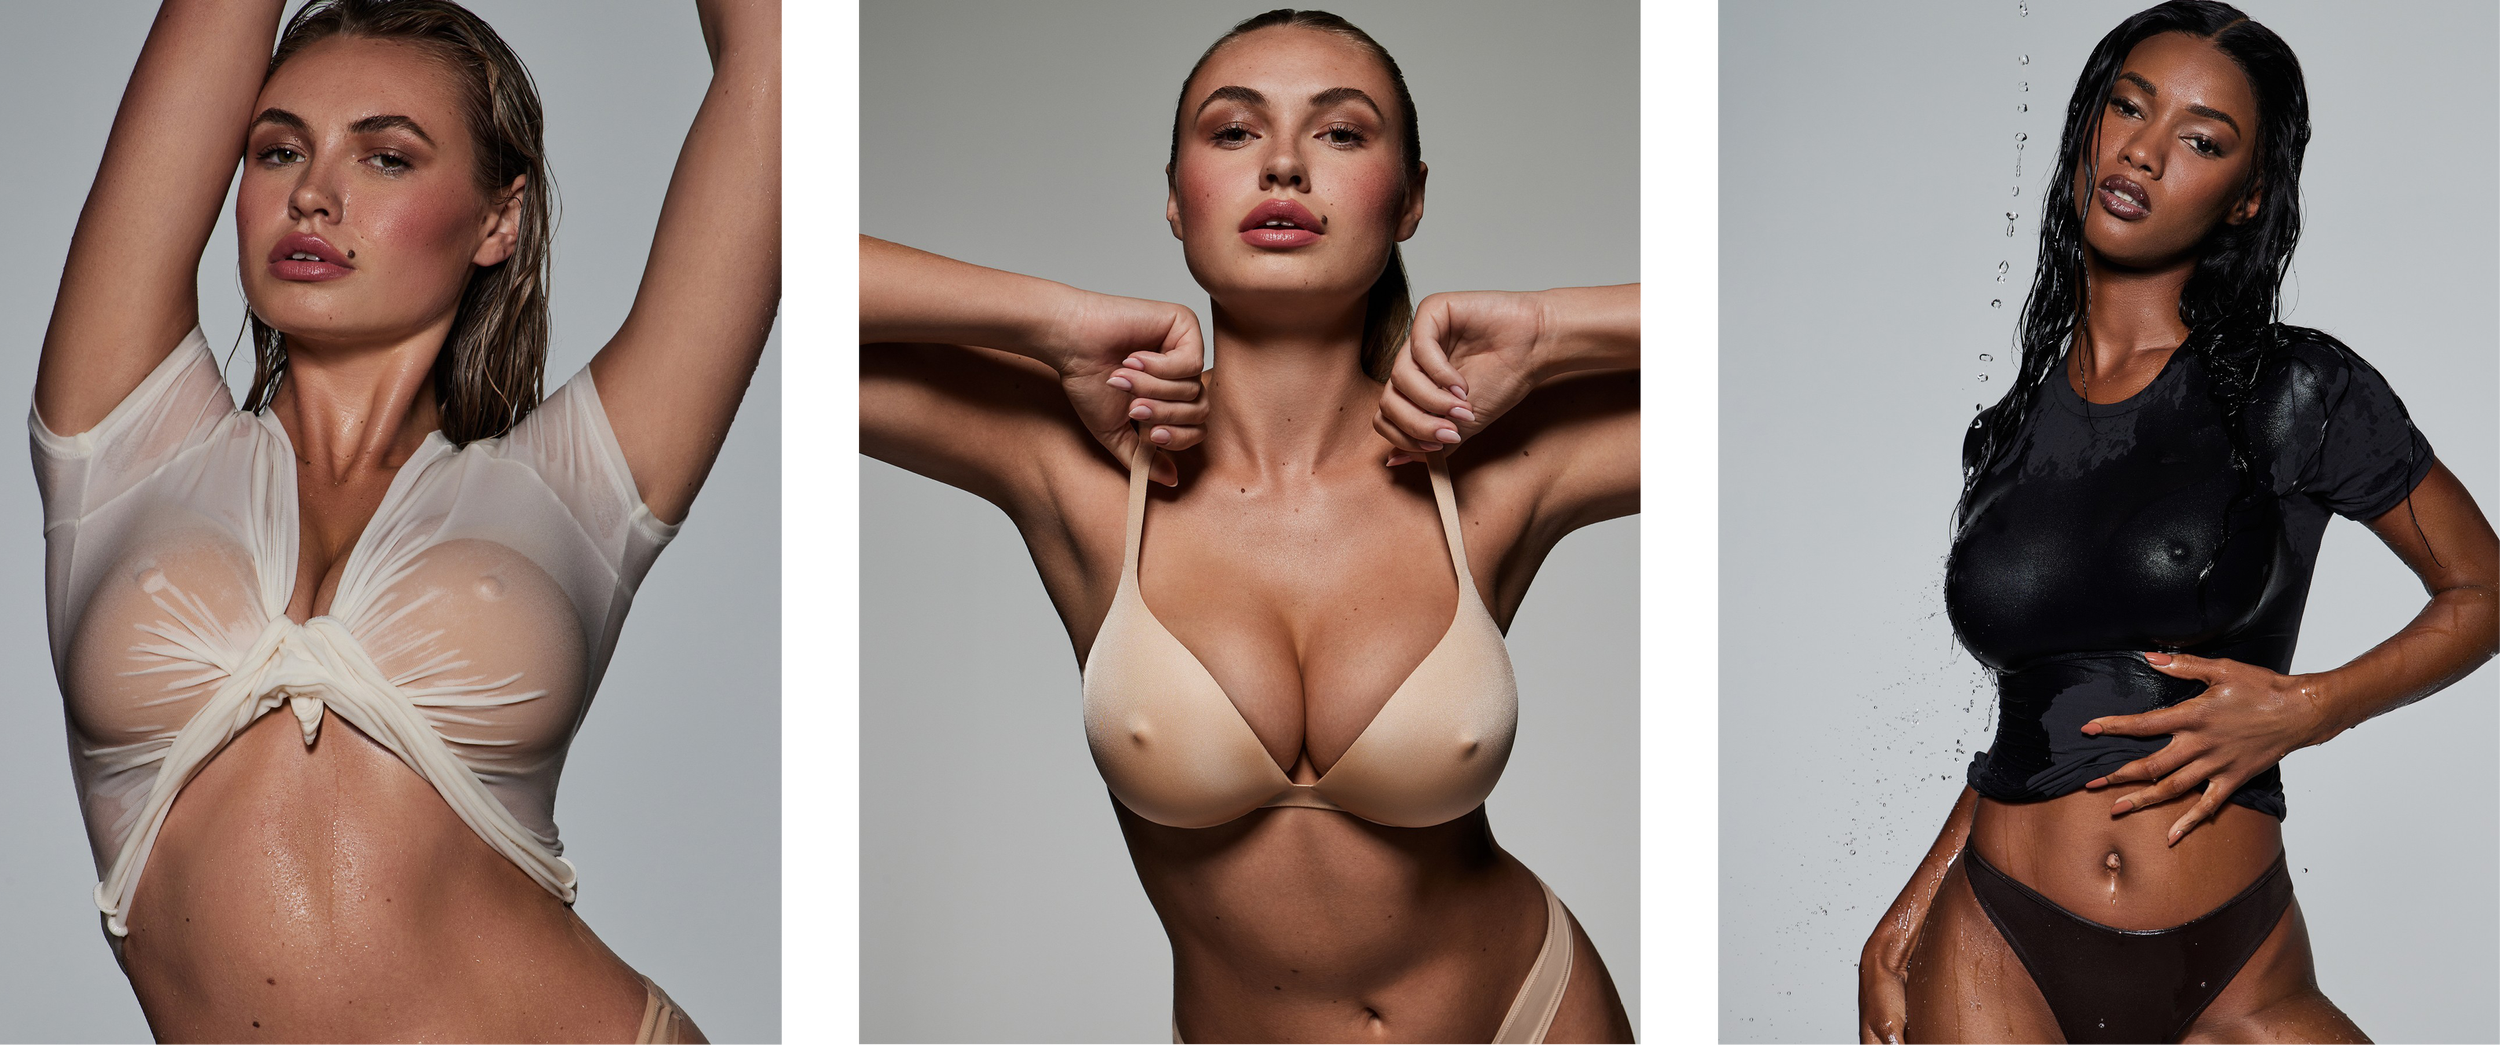 Why Are Climate Activists So Upset about A Bra with Fake Nipples